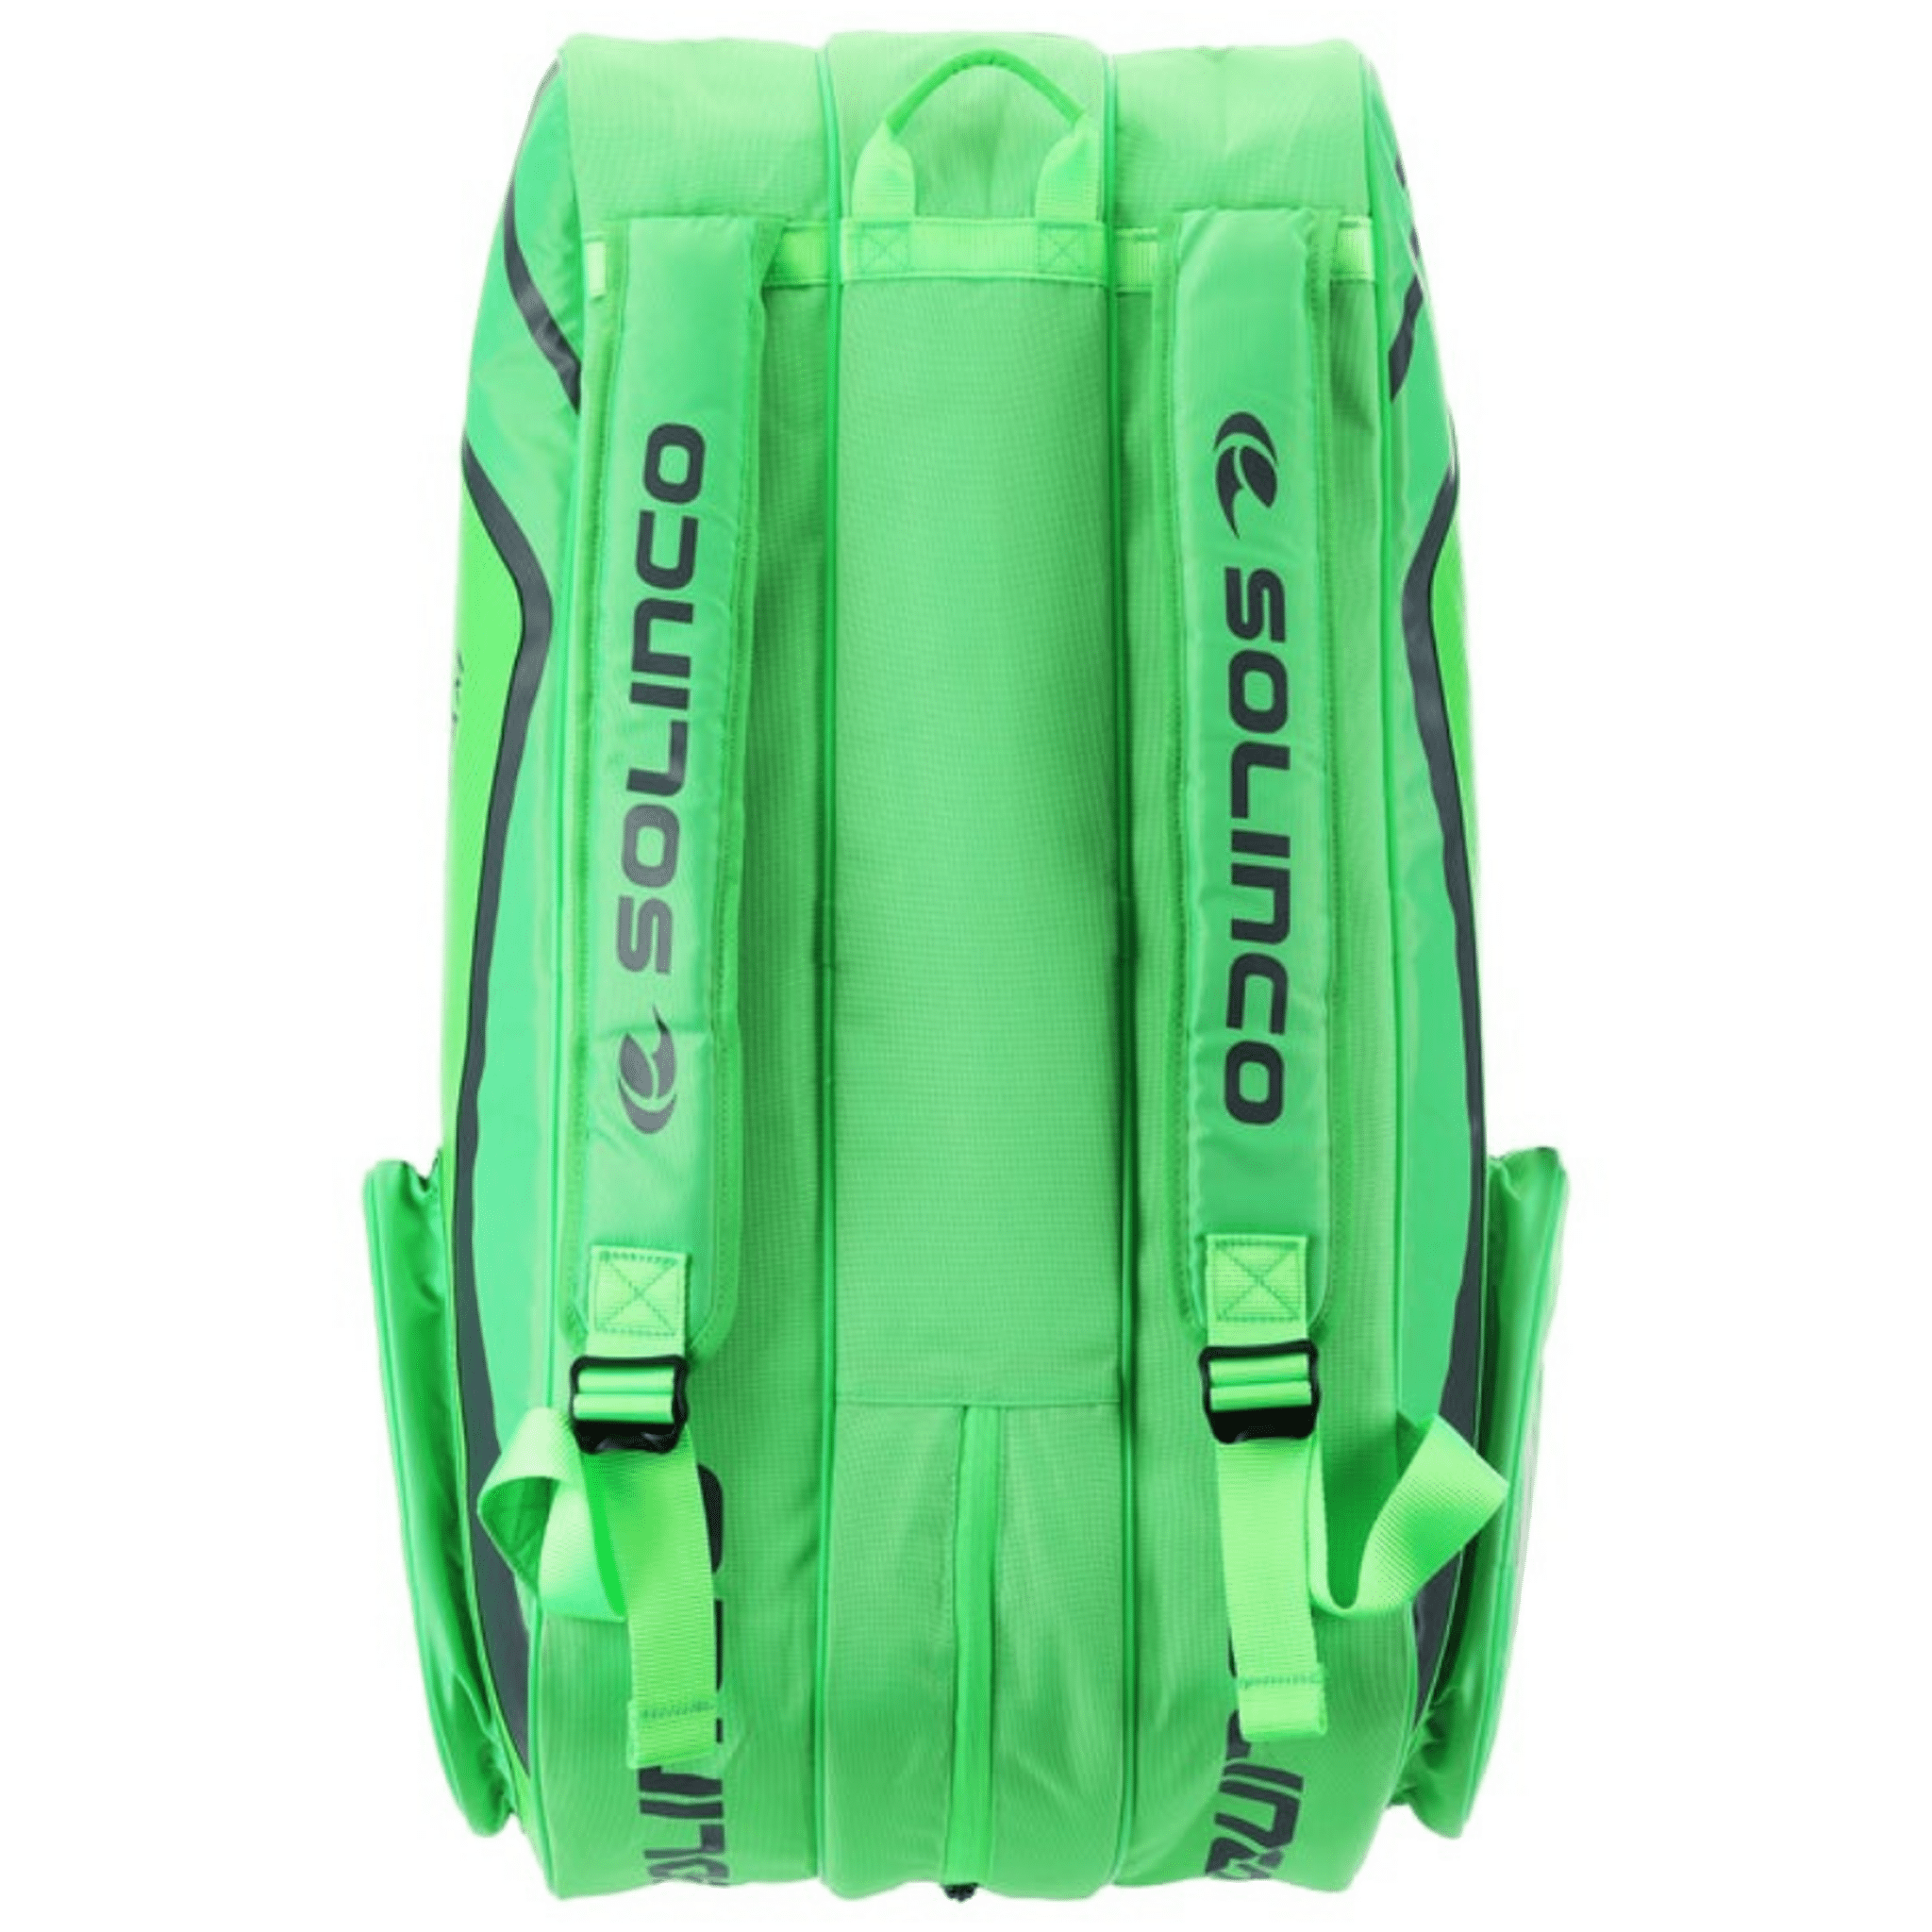 Solinco 15-Pack Tour Bag - Neon Green